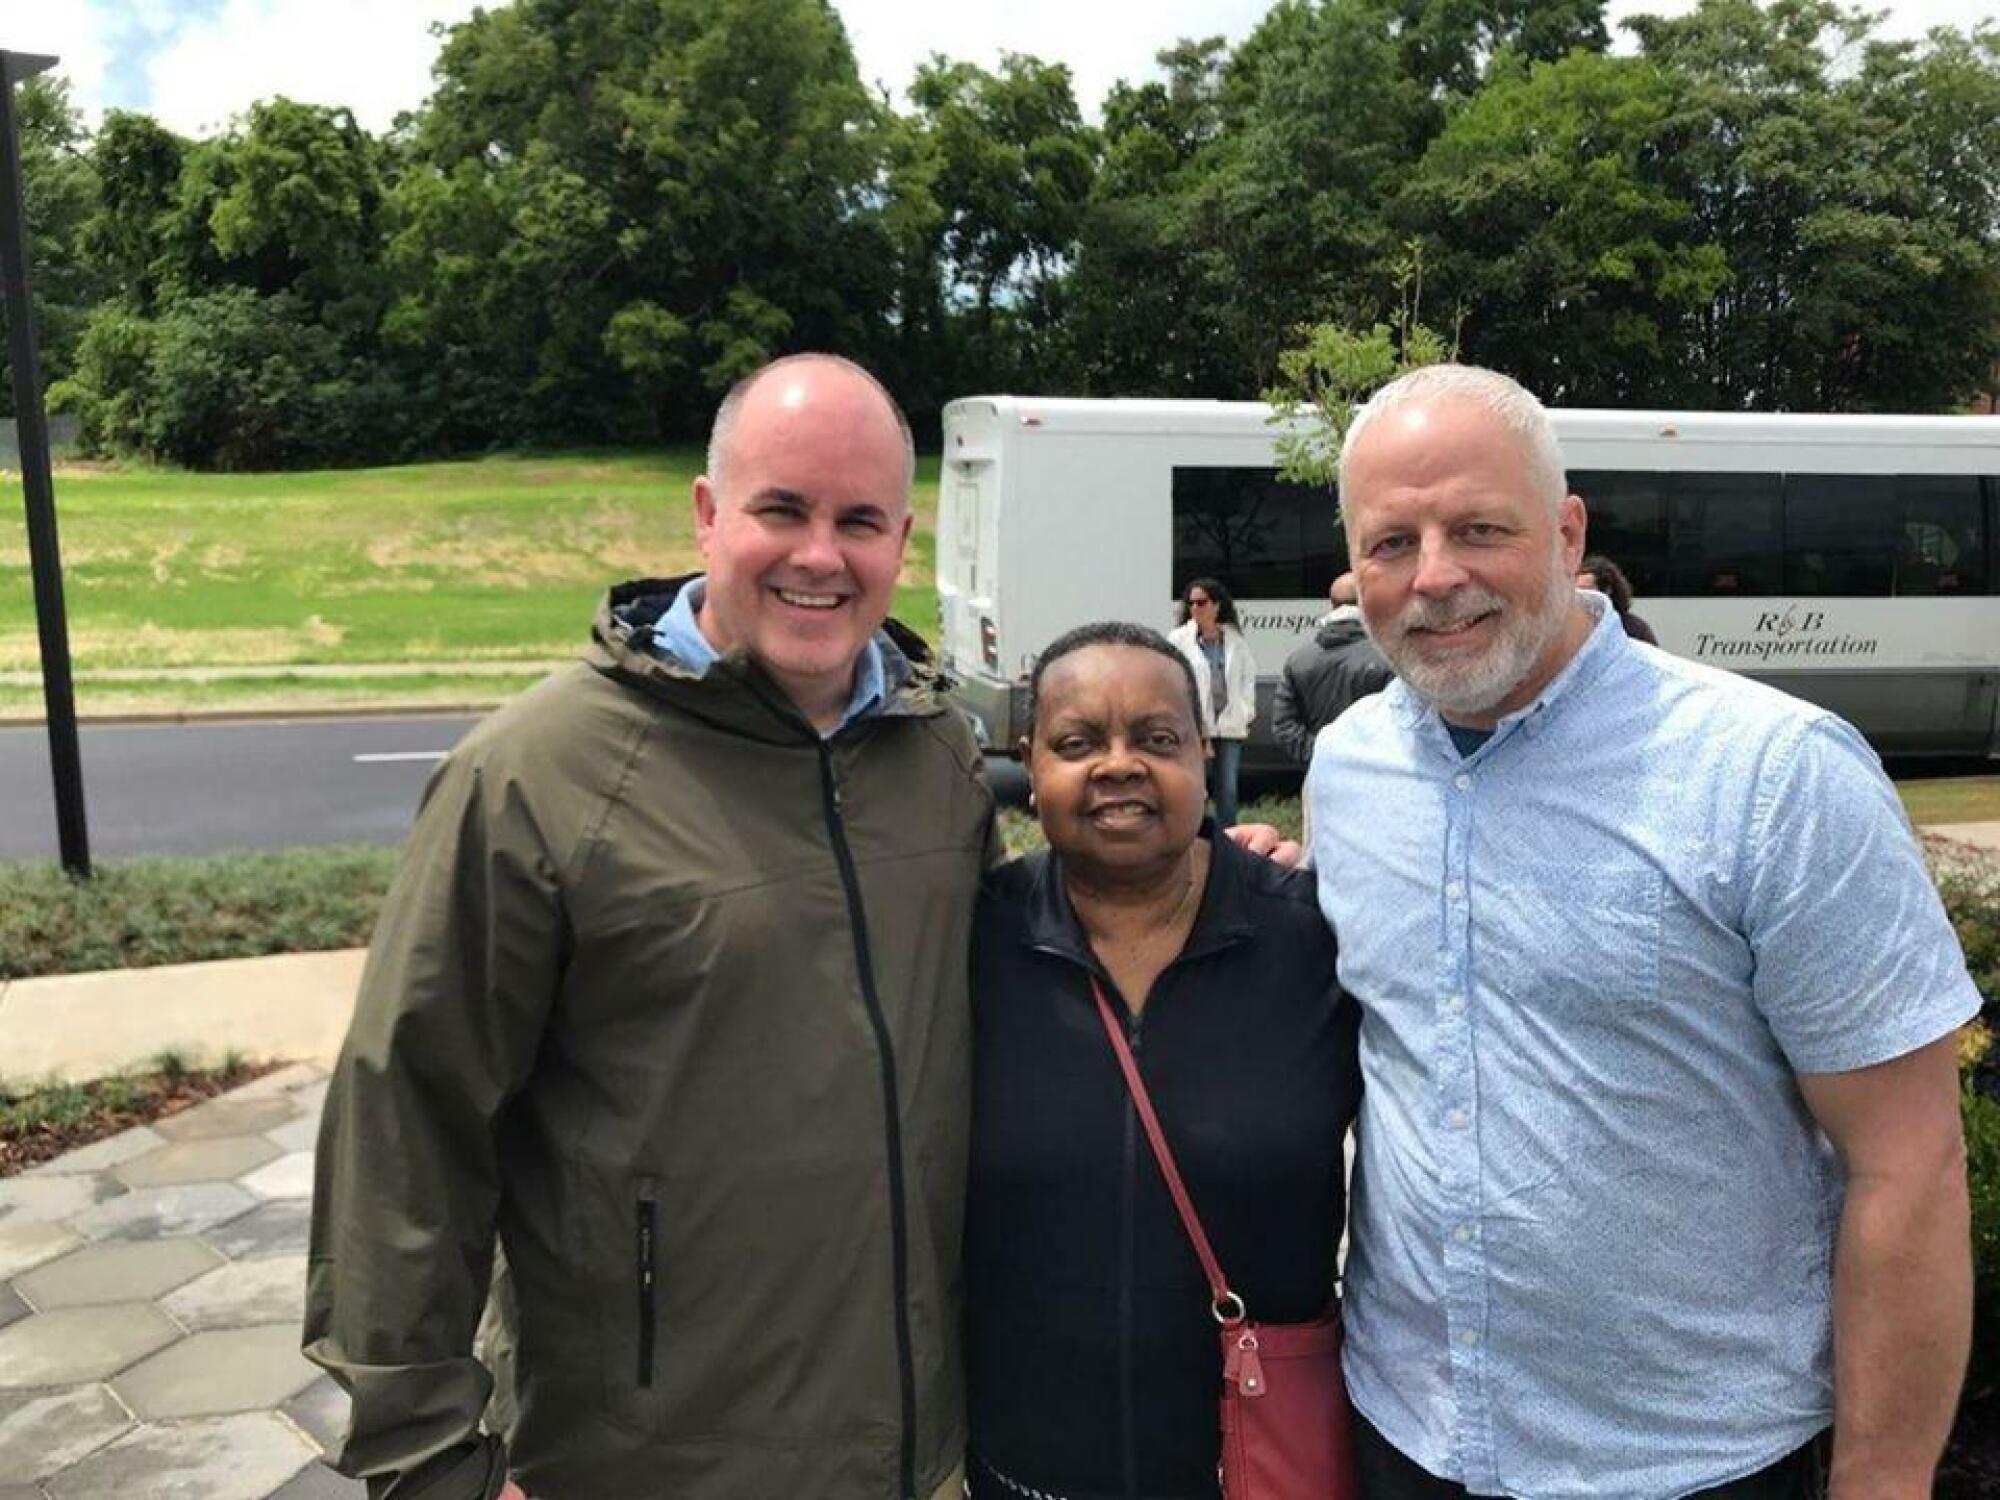 Mike Tusken, Virginia Huston and Warren Read at the National Memorial for Peace and Justice in Montgomery, Ala., in 2018.